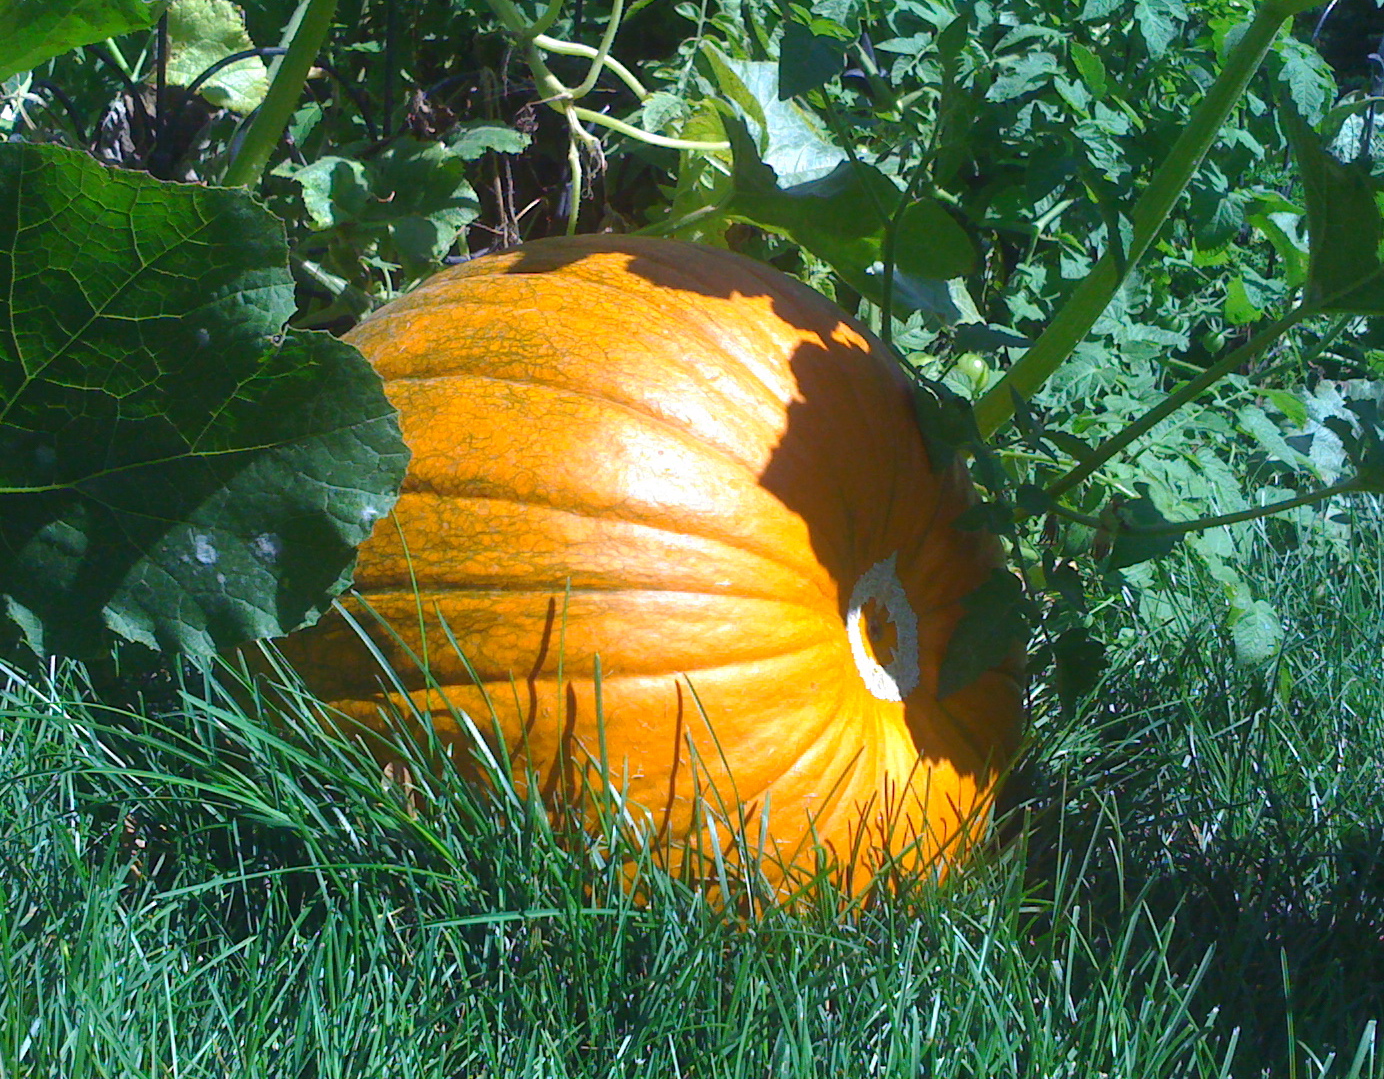 Beware of pumpkin seeds: they can actually grow into pumpkins that will take over your entire garden.